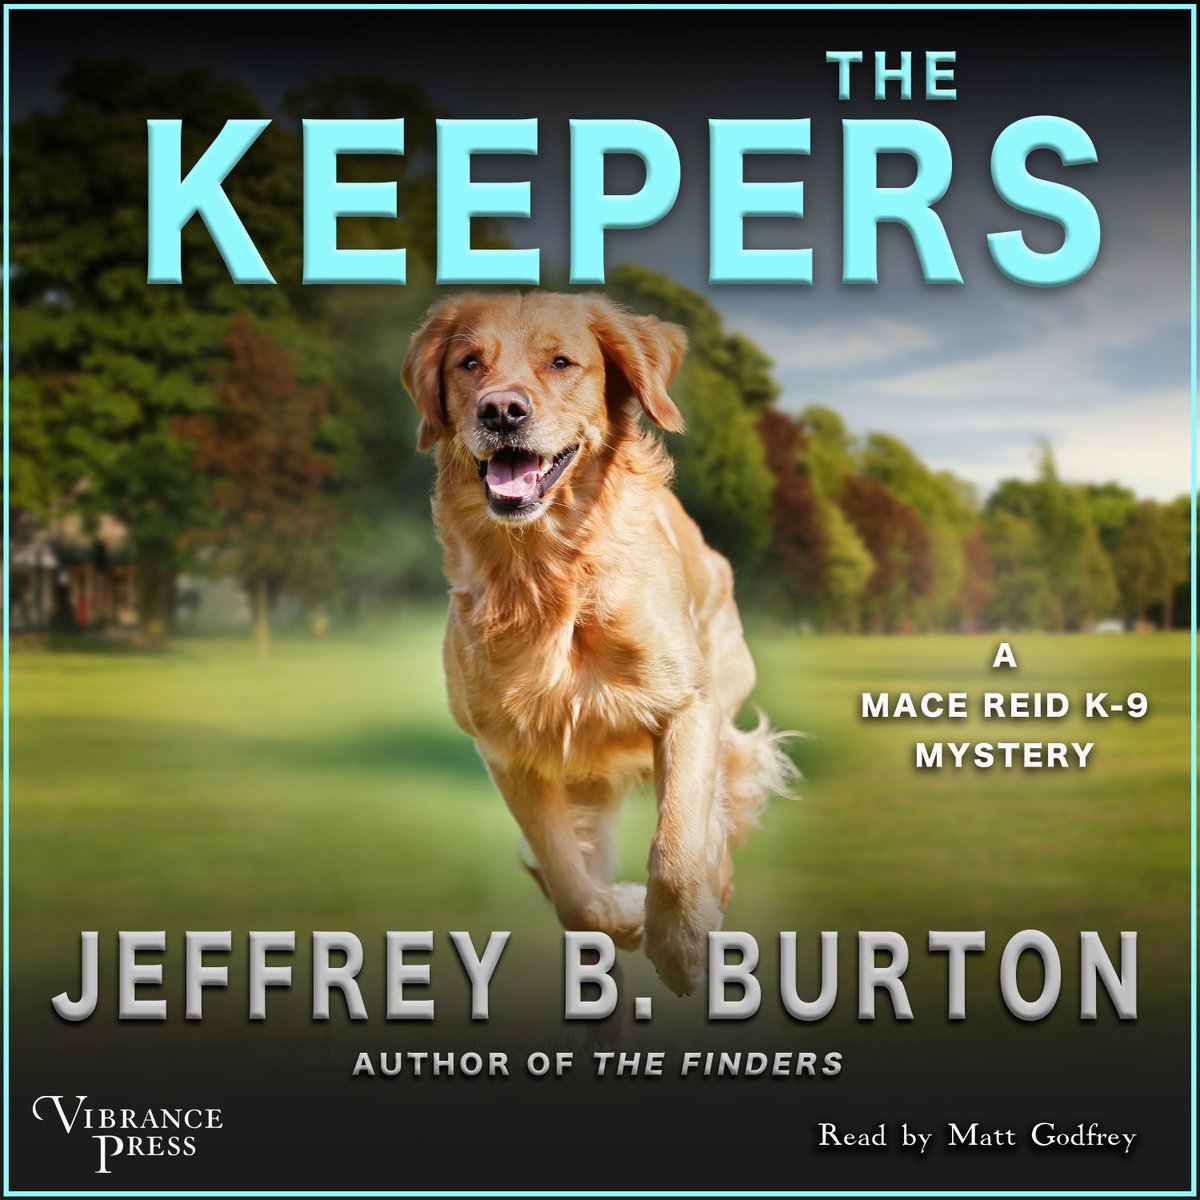 Golden retriever Vira and her handler Mace Reid are back at work when called out to Washington Park at 3AM

THE KEEPERS, by Jeffrey B. Burton, is the next exciting, fast-paced mystery featuring courageous cadaver dogs.

In audio from Vibrance Press
Wherever audiobooks are sold